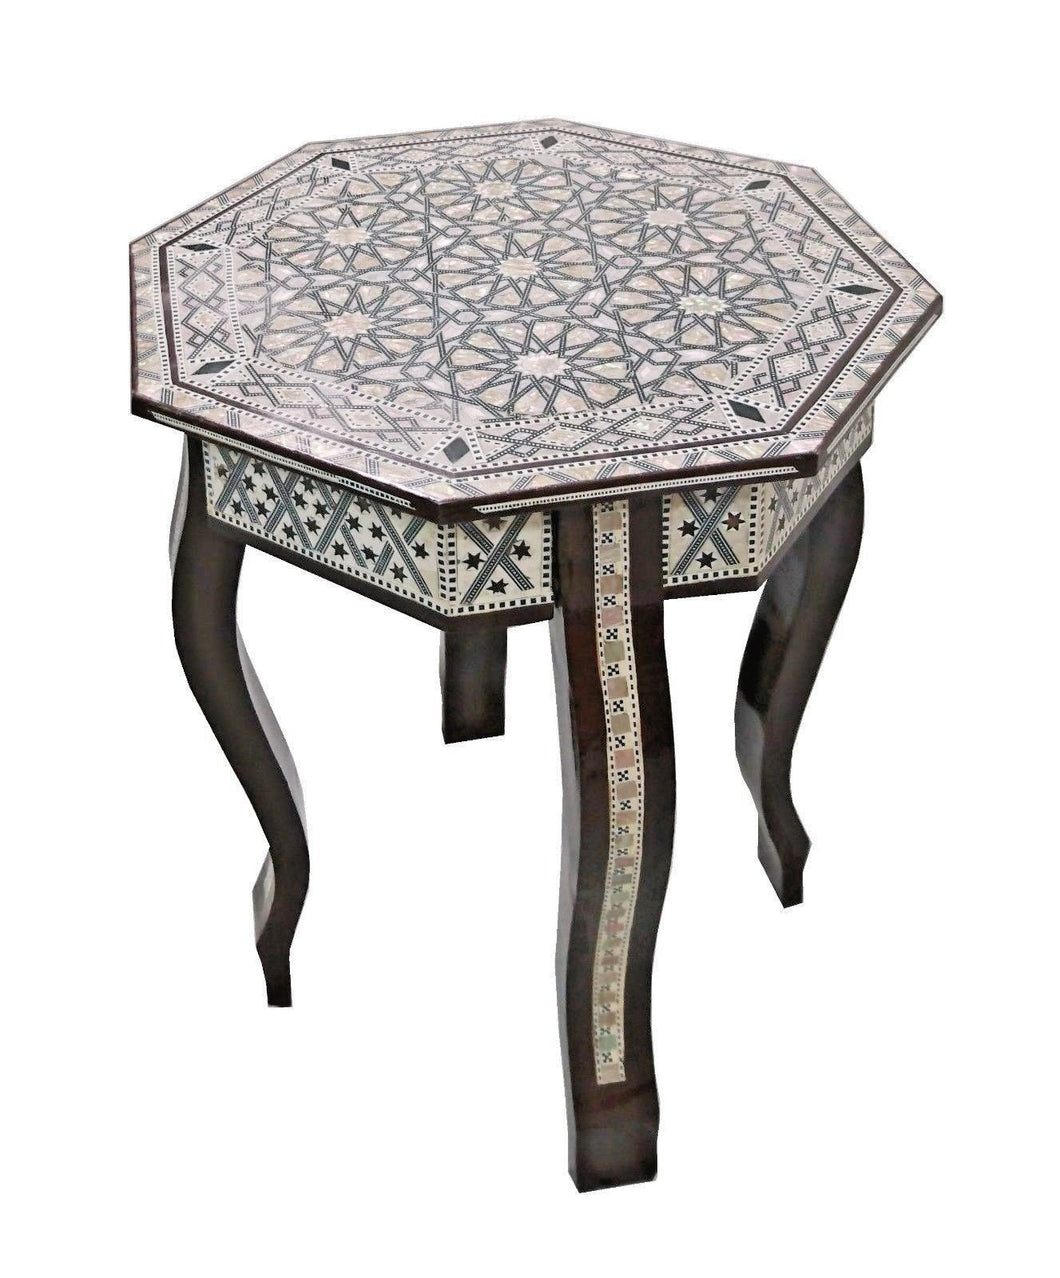 W155 BR Mother of Pearl Moroccan Corner Wood Octagonal Table Brown End Coffee